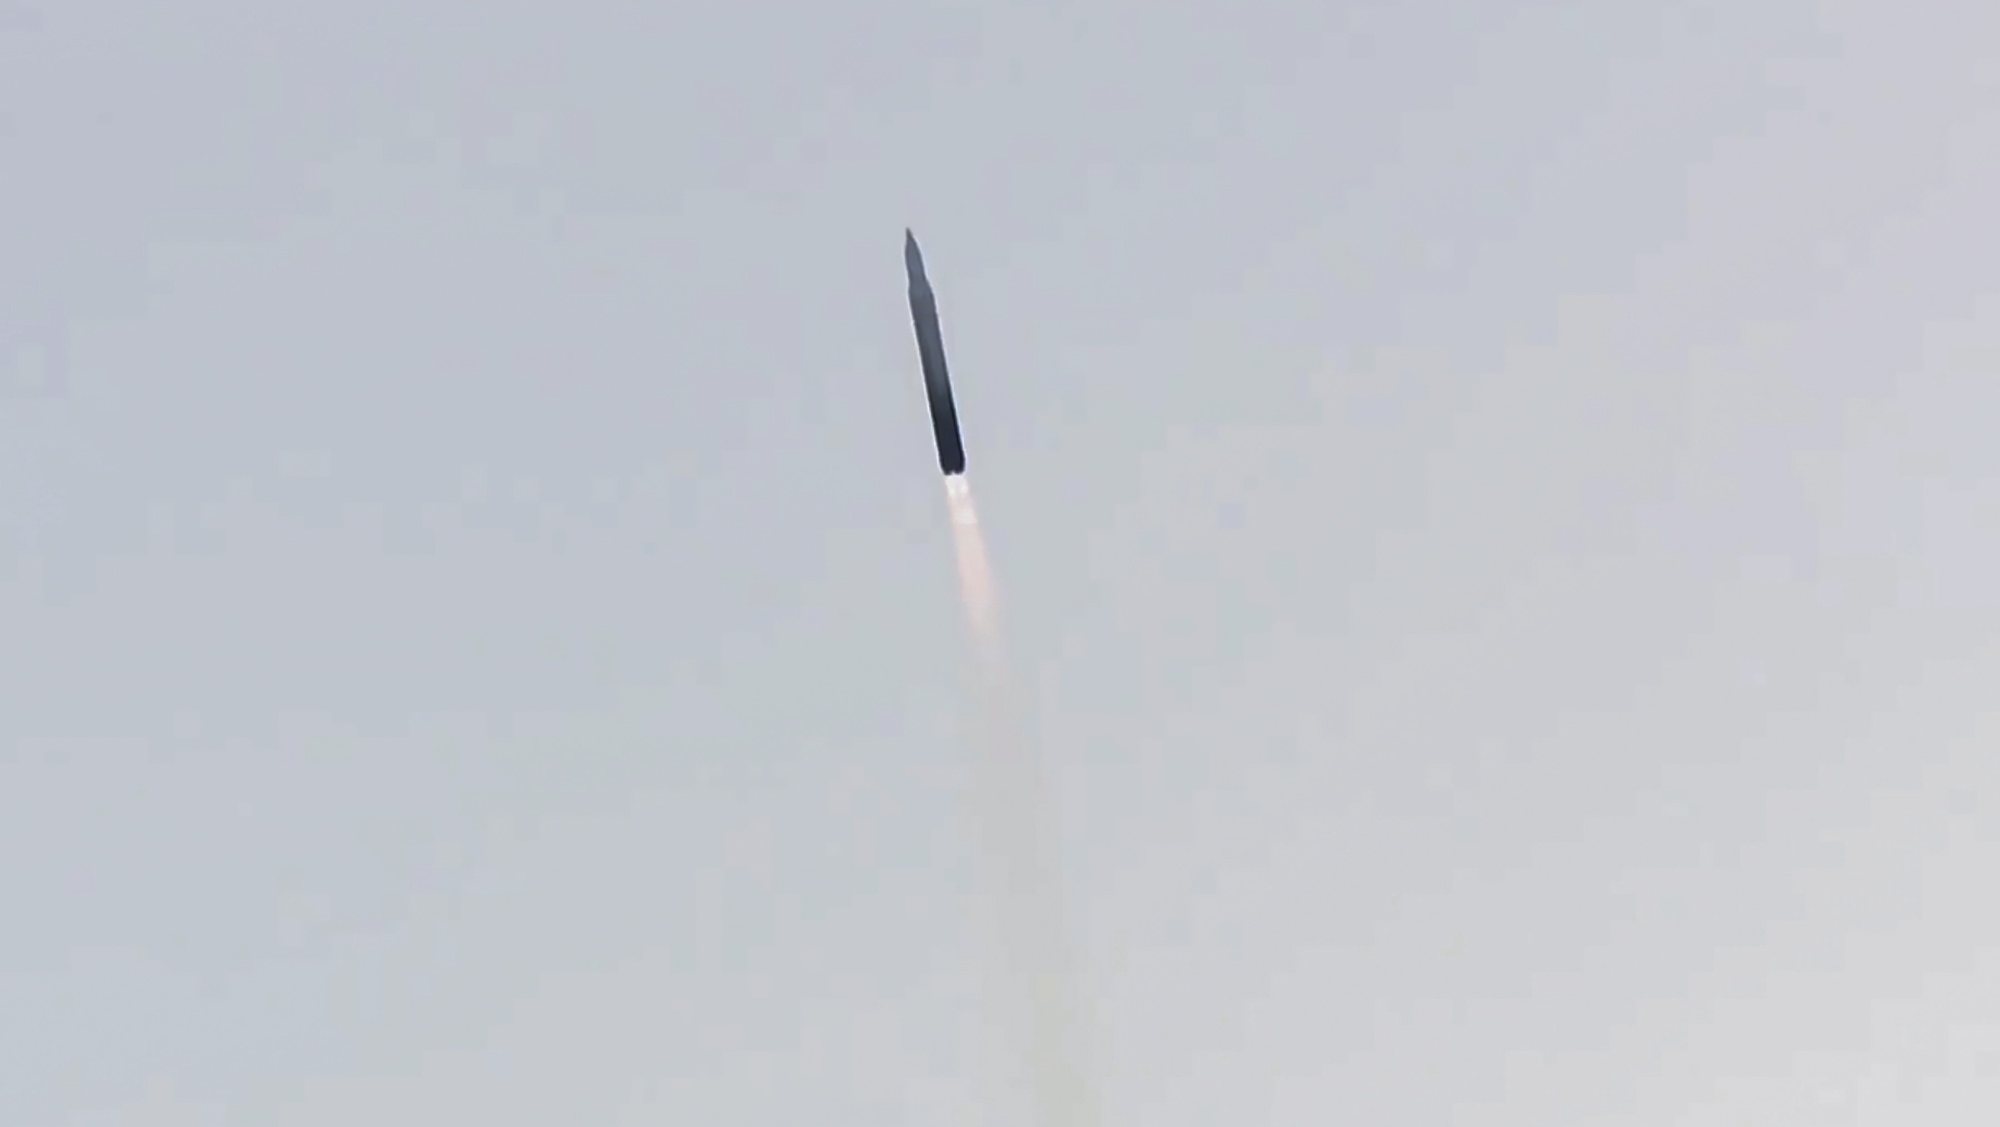 epa08092380 (FILE) - A frame grab taken from a handout file video released by the Press Service of the Ministry of Defence of the Russian Federation shows the launch of the first Avangard hypersonic missile system from the Dombarovsky position area, Russia, 26 December 2018 (issued 28 December 2019). Russian Defense Minister Shoygu announced on 27 December 2019, that the first regiment of Avangard hypersonic missiles have been put into service at an undisclosed location, suggesting the Urals, without providing further details. President Putin, who unveiled images of the new weapon in 2018, said that the nuclear-capable missiles can travel more than 20 times the speed of sound.  EPA/RUSSIAN DEFENCE MINISTRY PRESS SERVICE HANDOUT -- MANDATORY CREDIT -- HANDOUT EDITORIAL USE ONLY/NO SALES